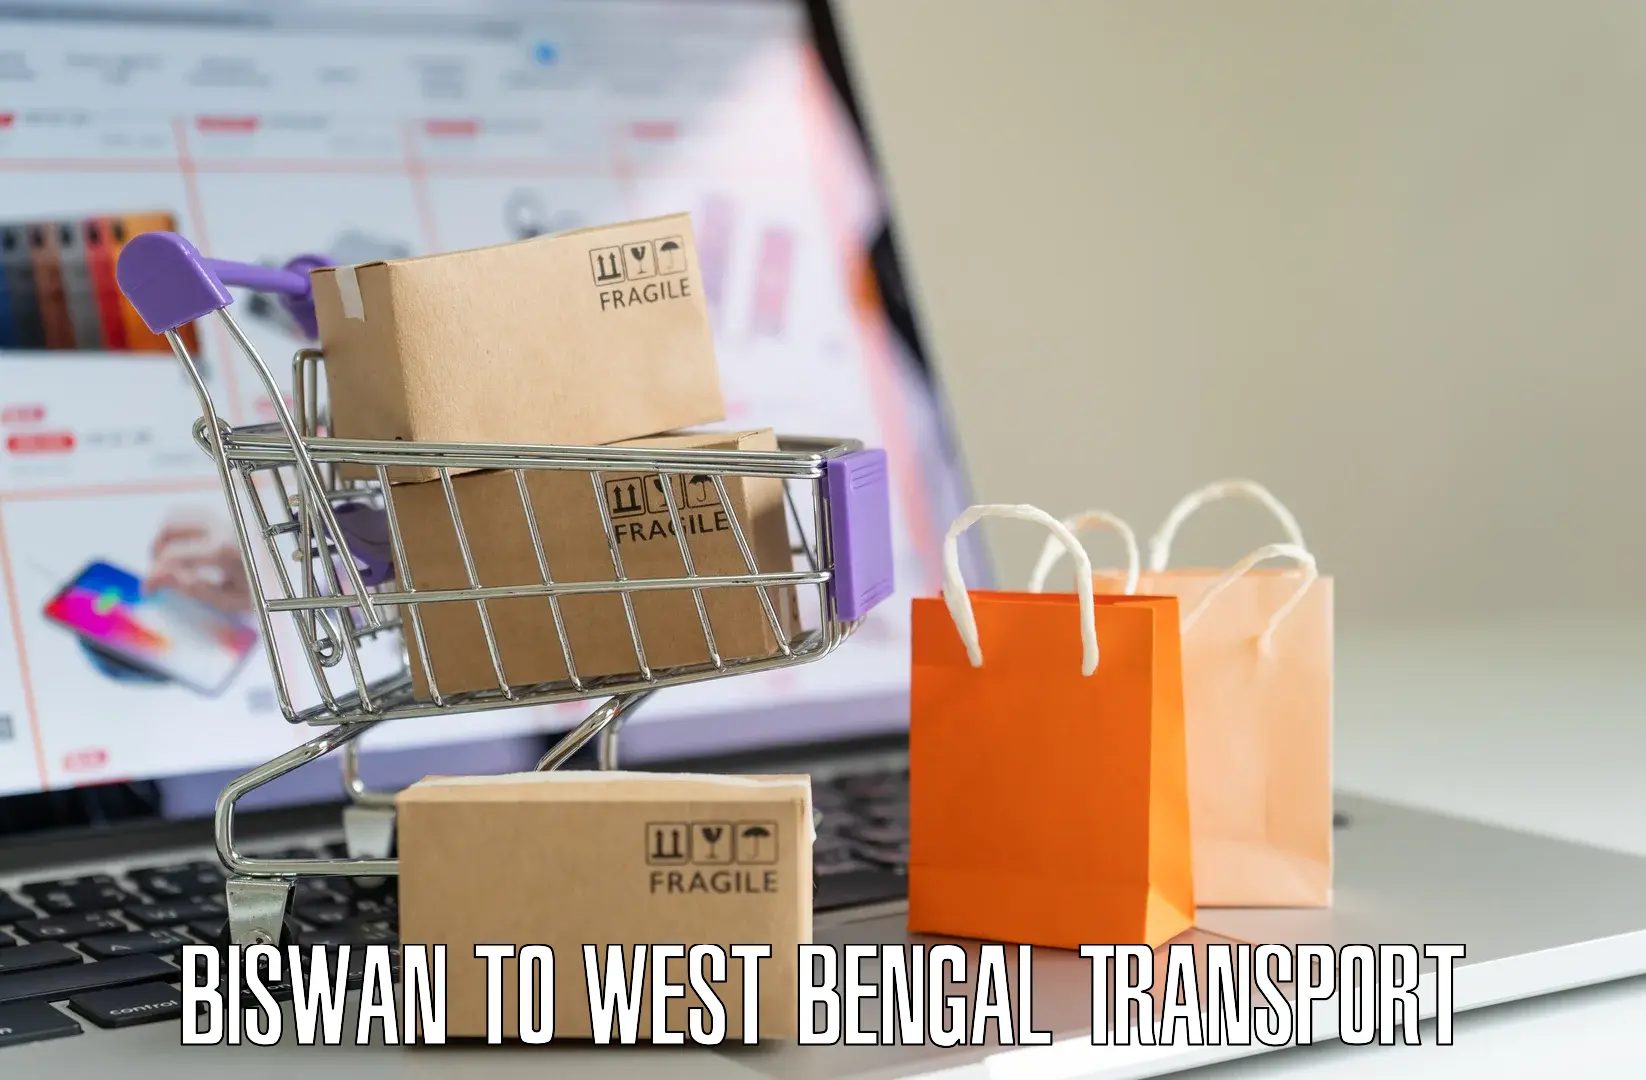 Cargo train transport services in Biswan to West Bengal